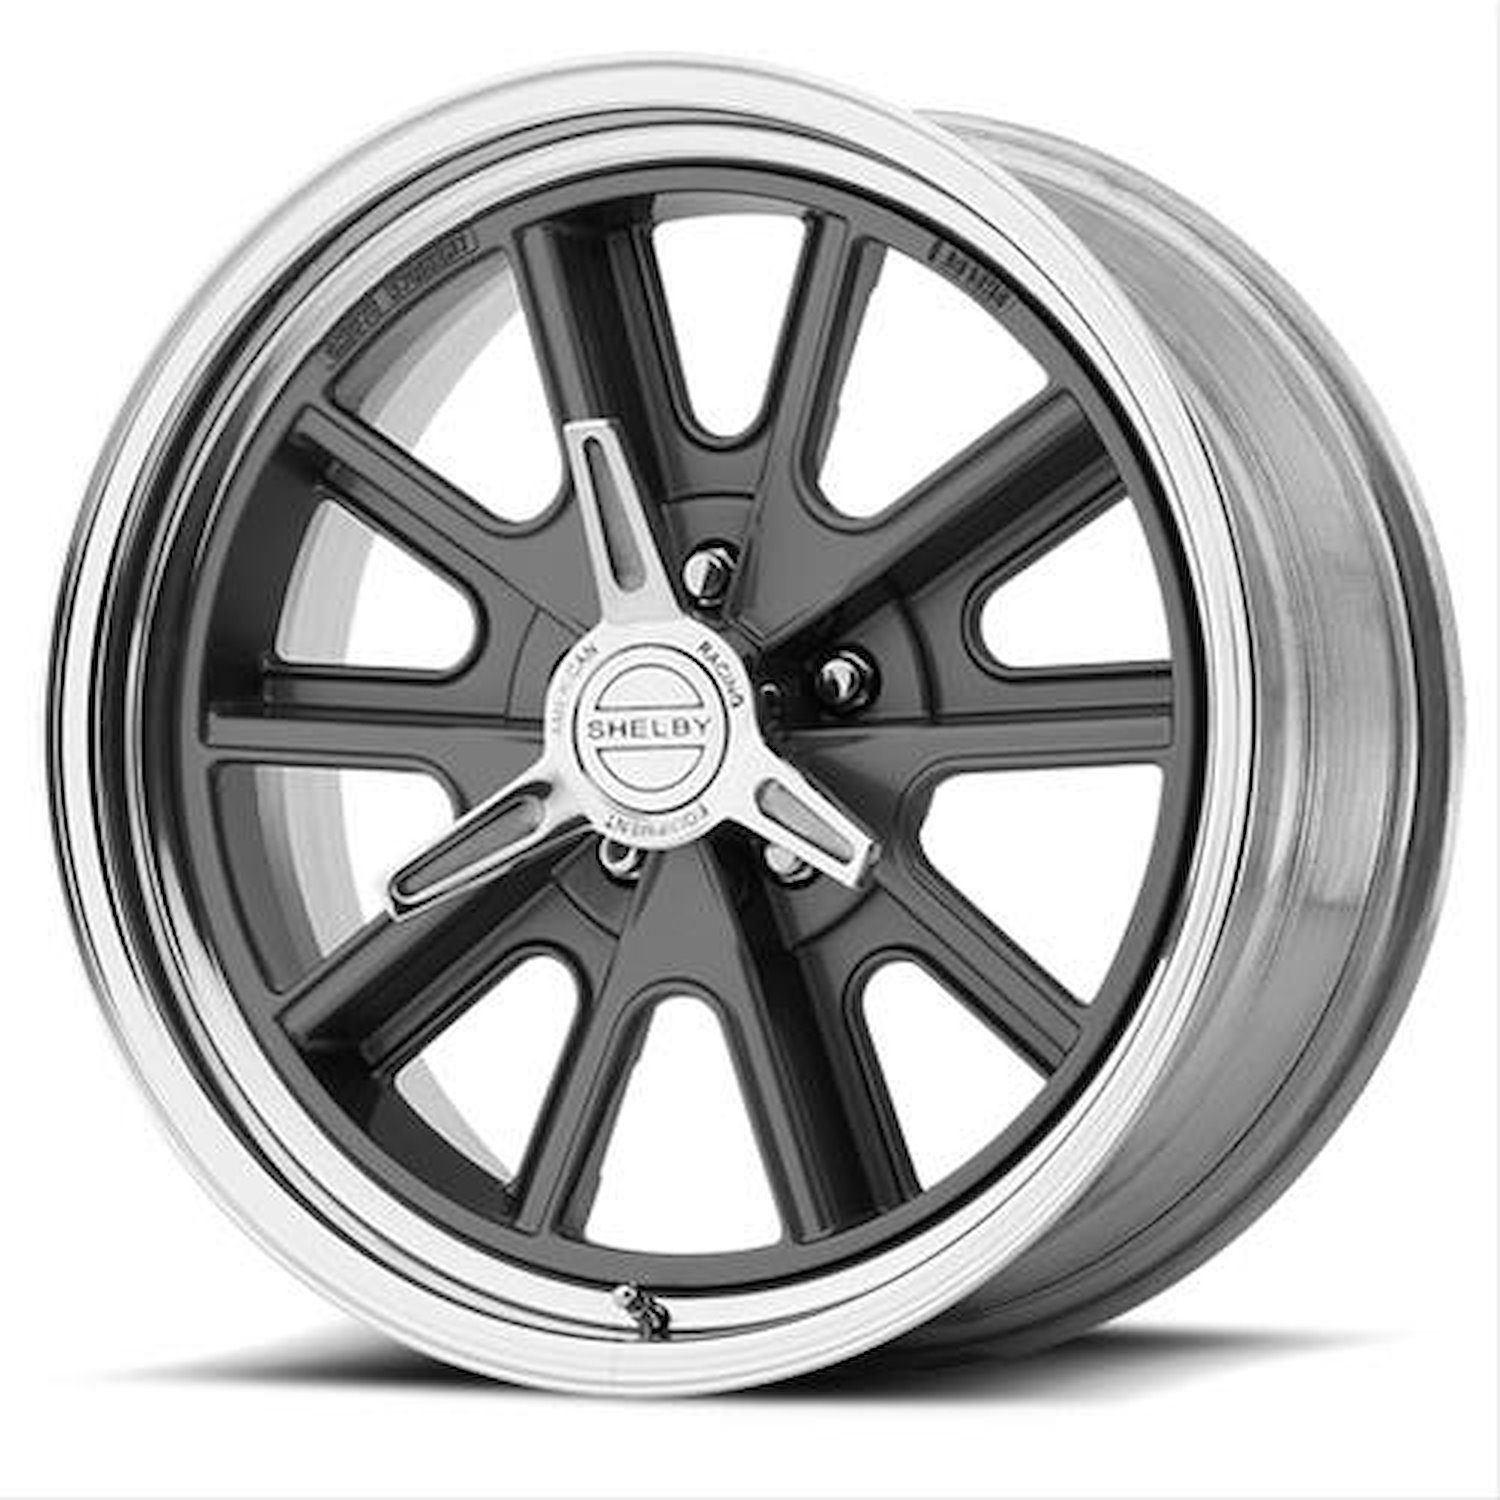 AMERICAN RACING 427 SHELBY COBRA TWO-PIECE MAG GRAY CENTER POLISHED BARREL 15 x 7 5x4.5 -19 3.25